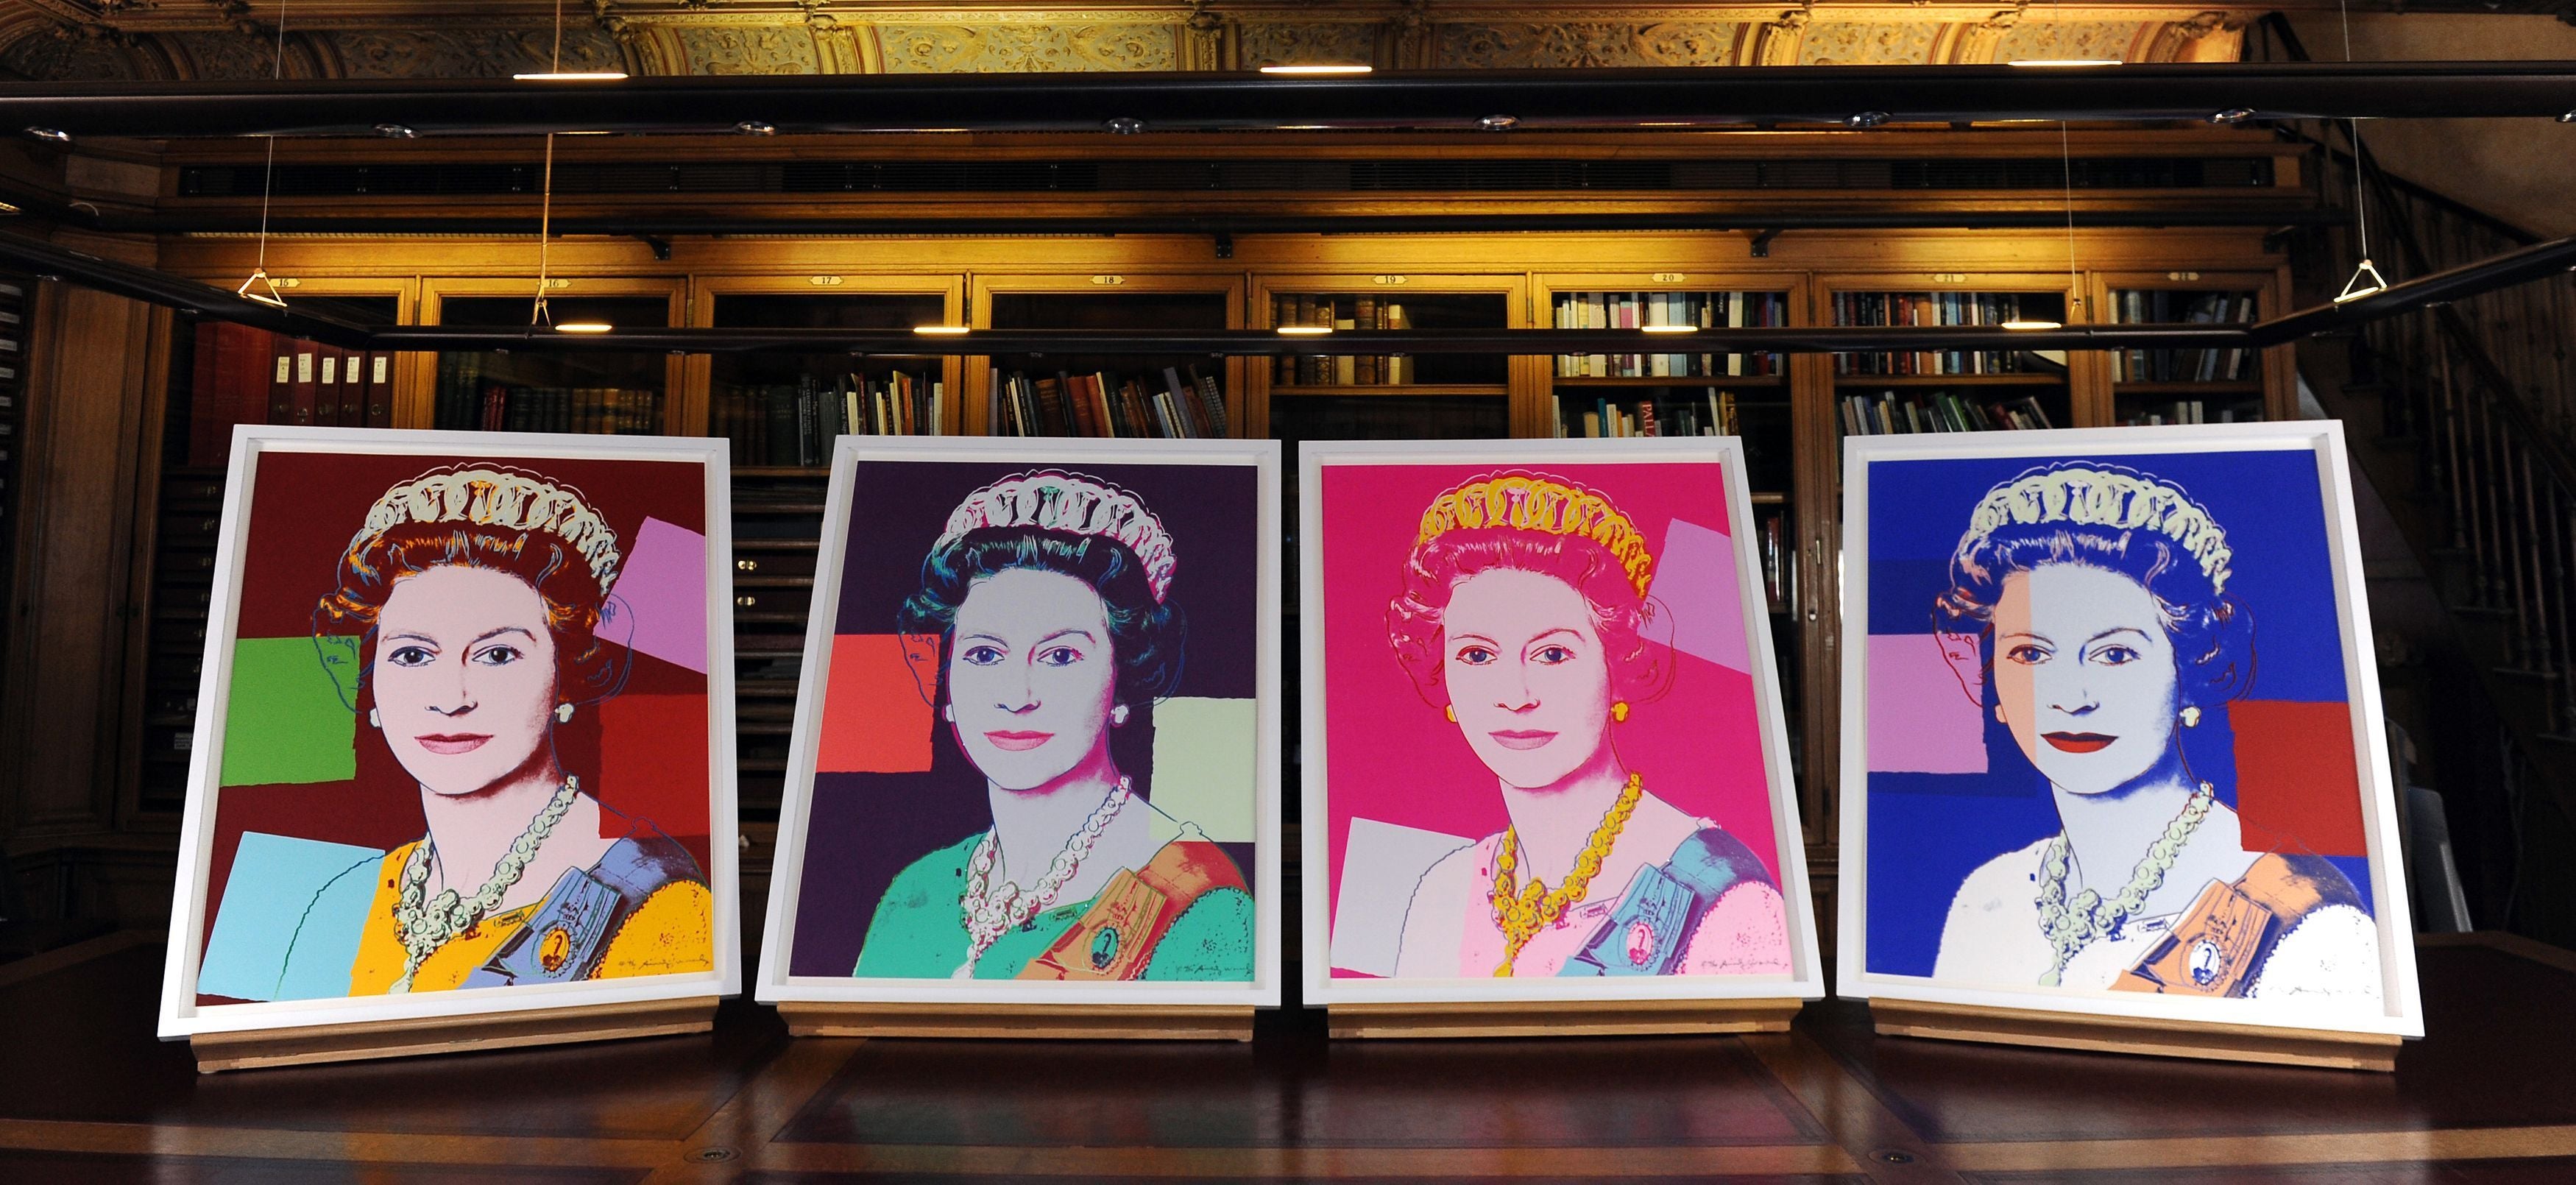 Andy Warhol’s Reigning Queens: Queen Elizabeth II portraits on show in the Lower Library at Windsor Castle (Andrew Matthews/PA)